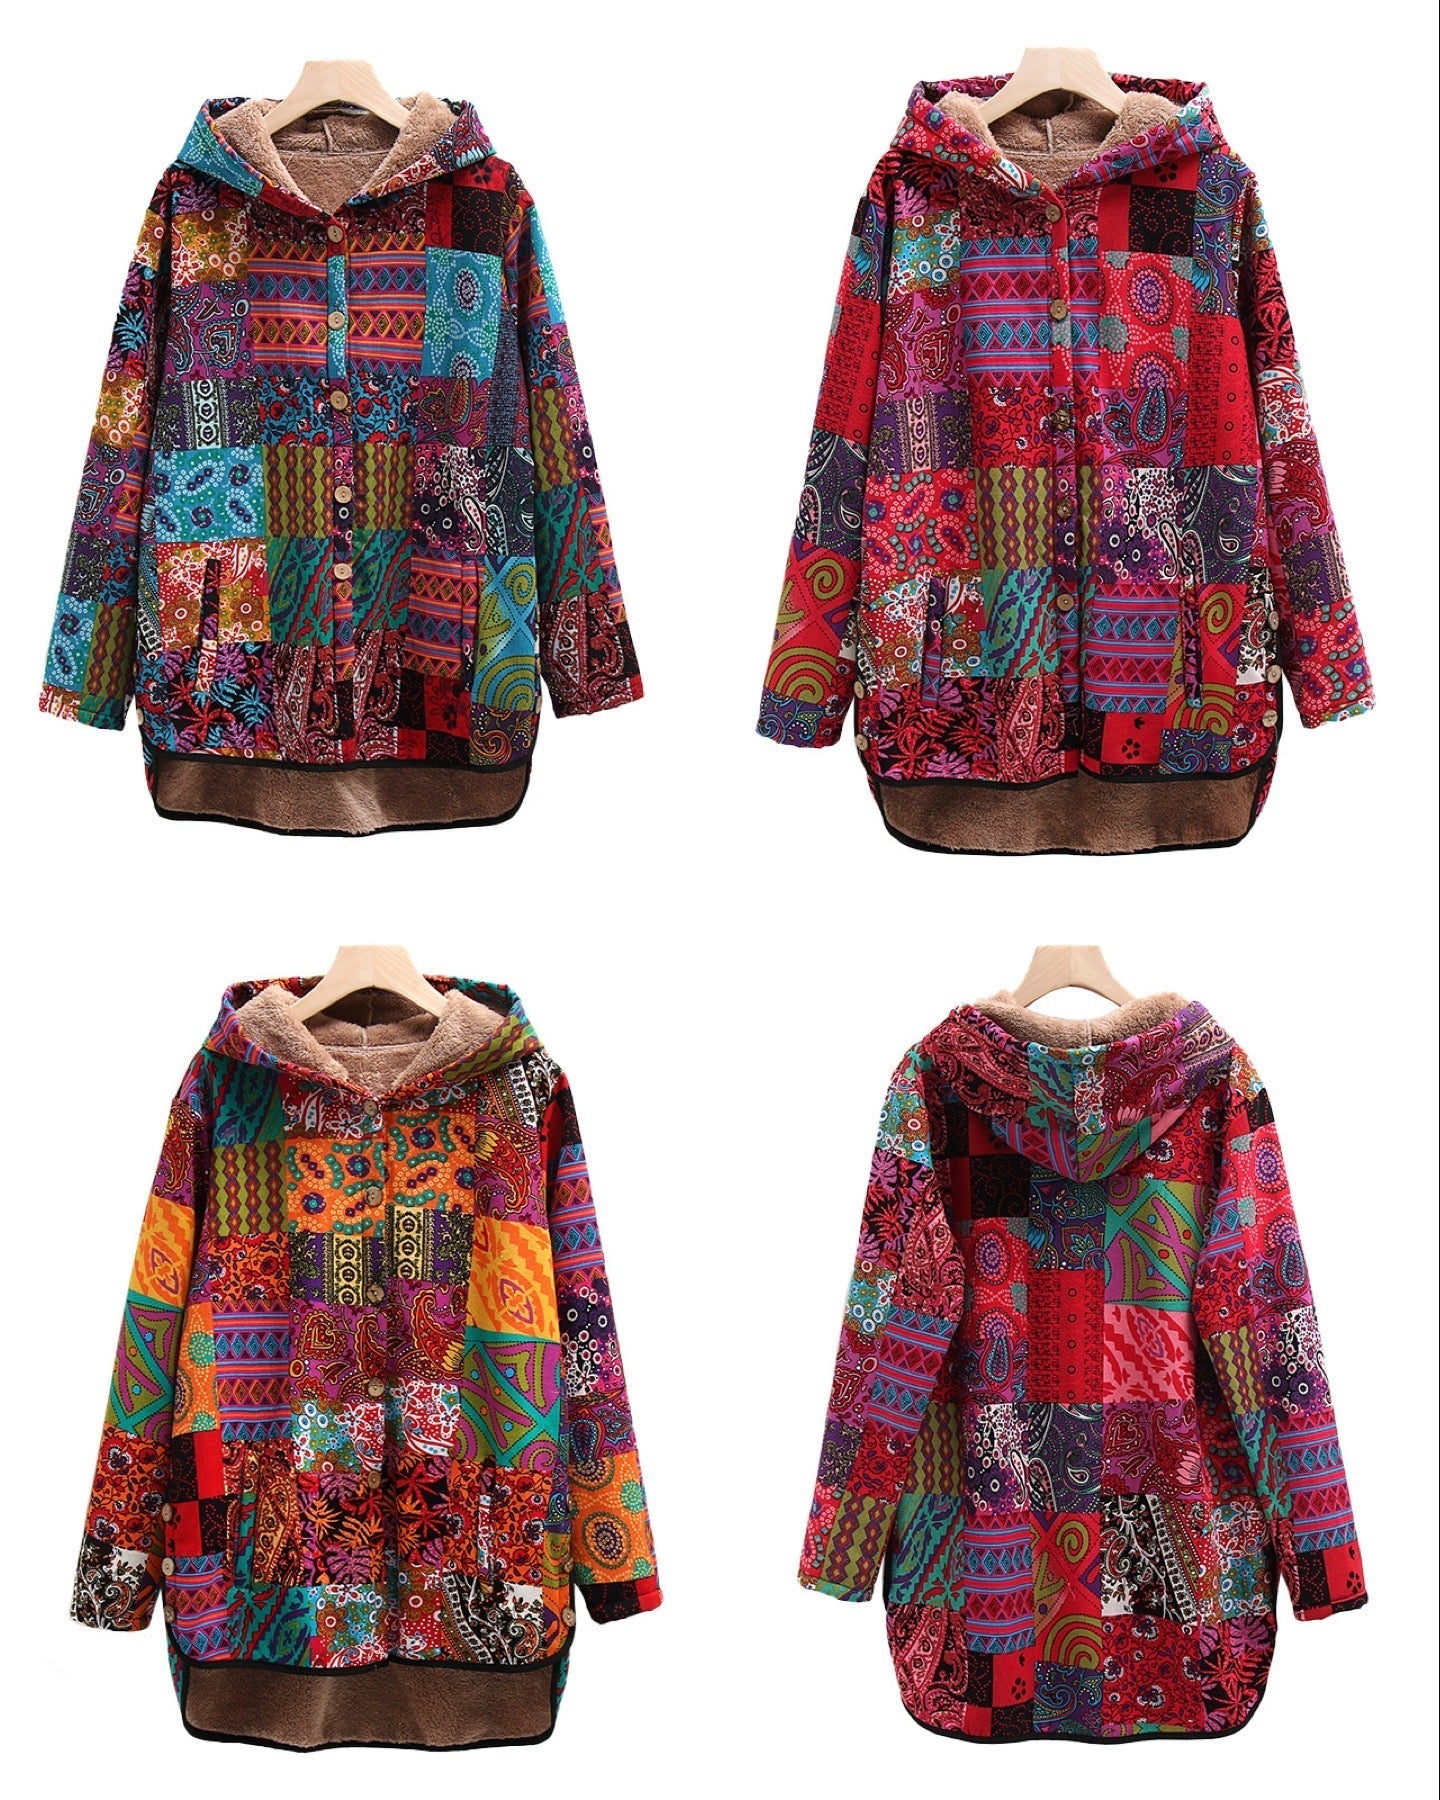 Bohemian Patchwork Button up Hooded Jacket- Red